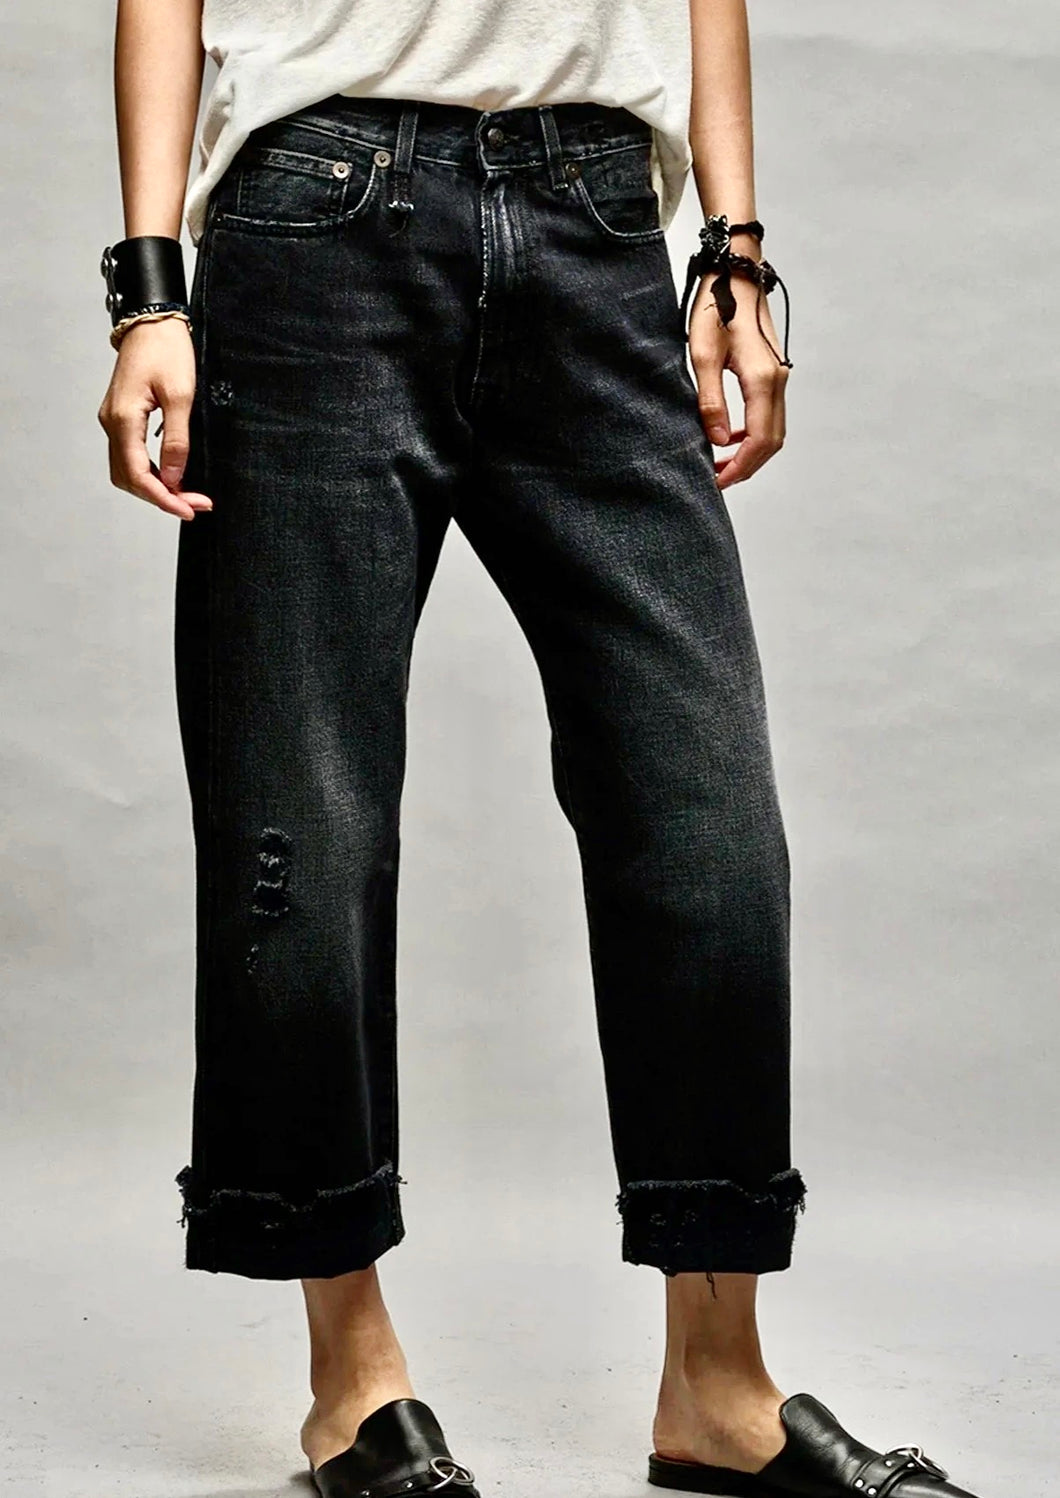 A person is wearing black, slightly distressed R13 Jake Black Boyfriend Jean with frayed hems, a white t-shirt, and black sandals. They have black bracelets on their wrists. The image focuses on the relaxed fit of the premium denim against a plain background.